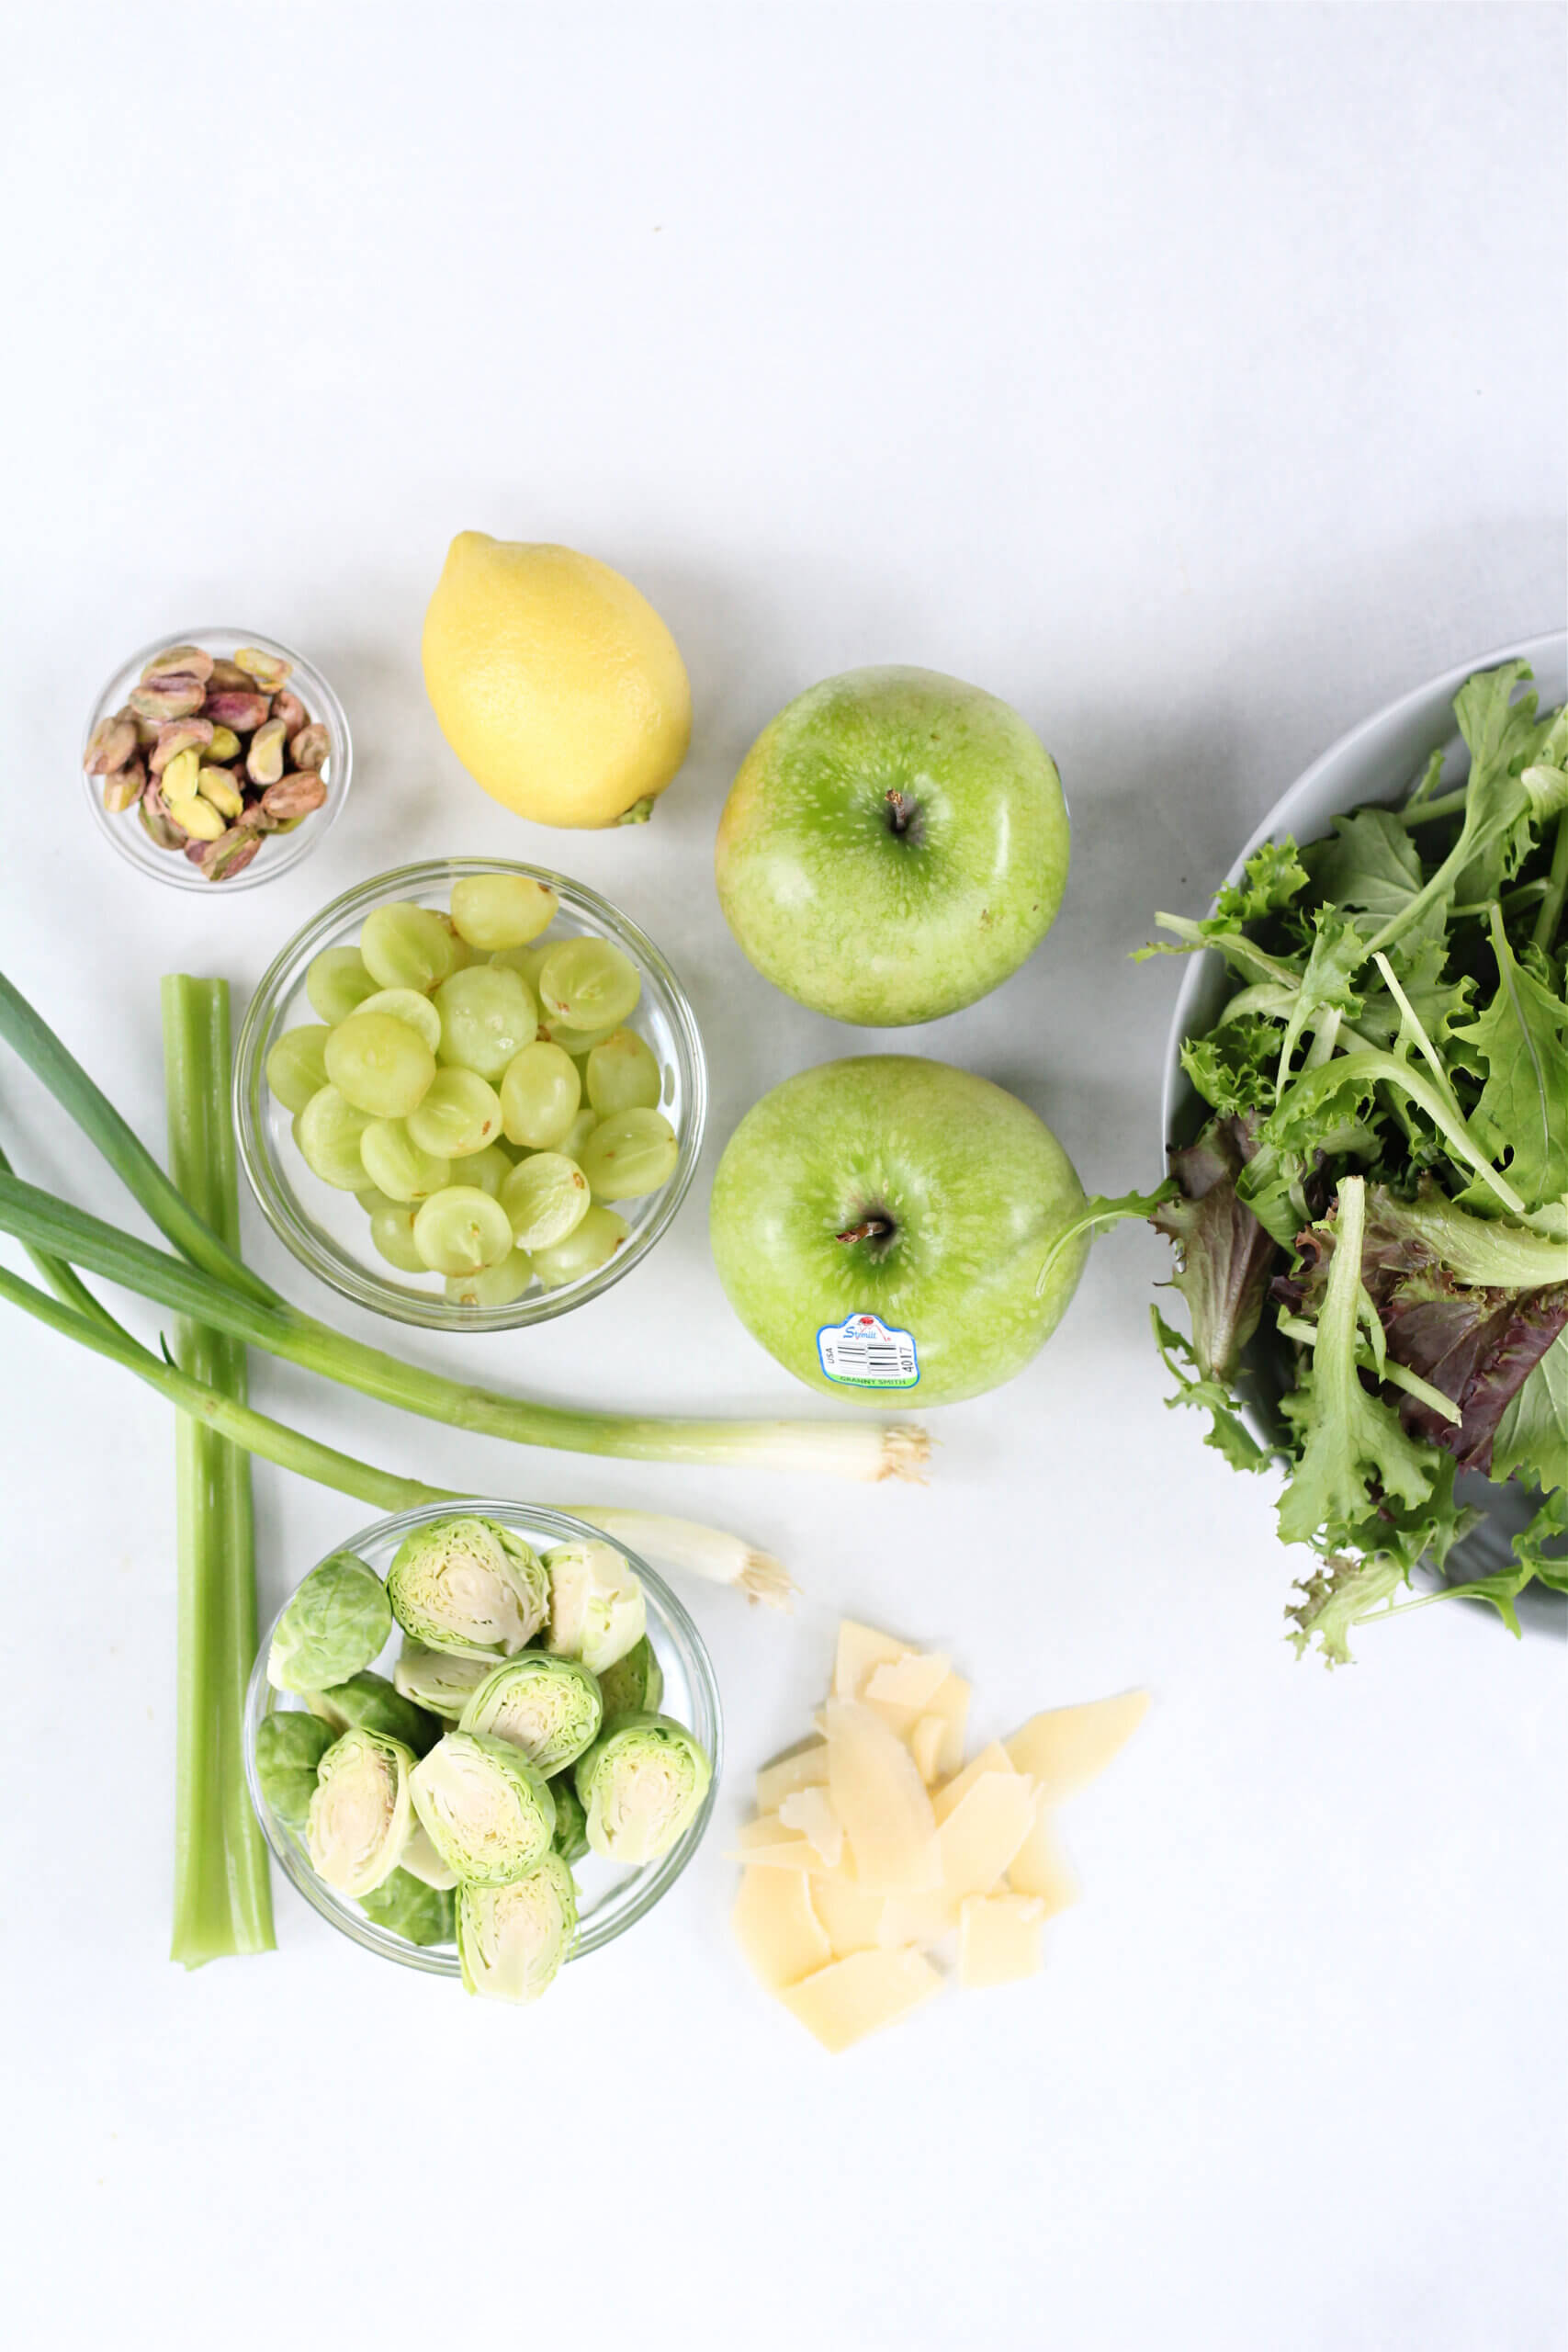 Ingredients for the Ultimate Green Salad- granny smith apples, grapes, green onions, brussel sprouts, mixed greens, lemon,